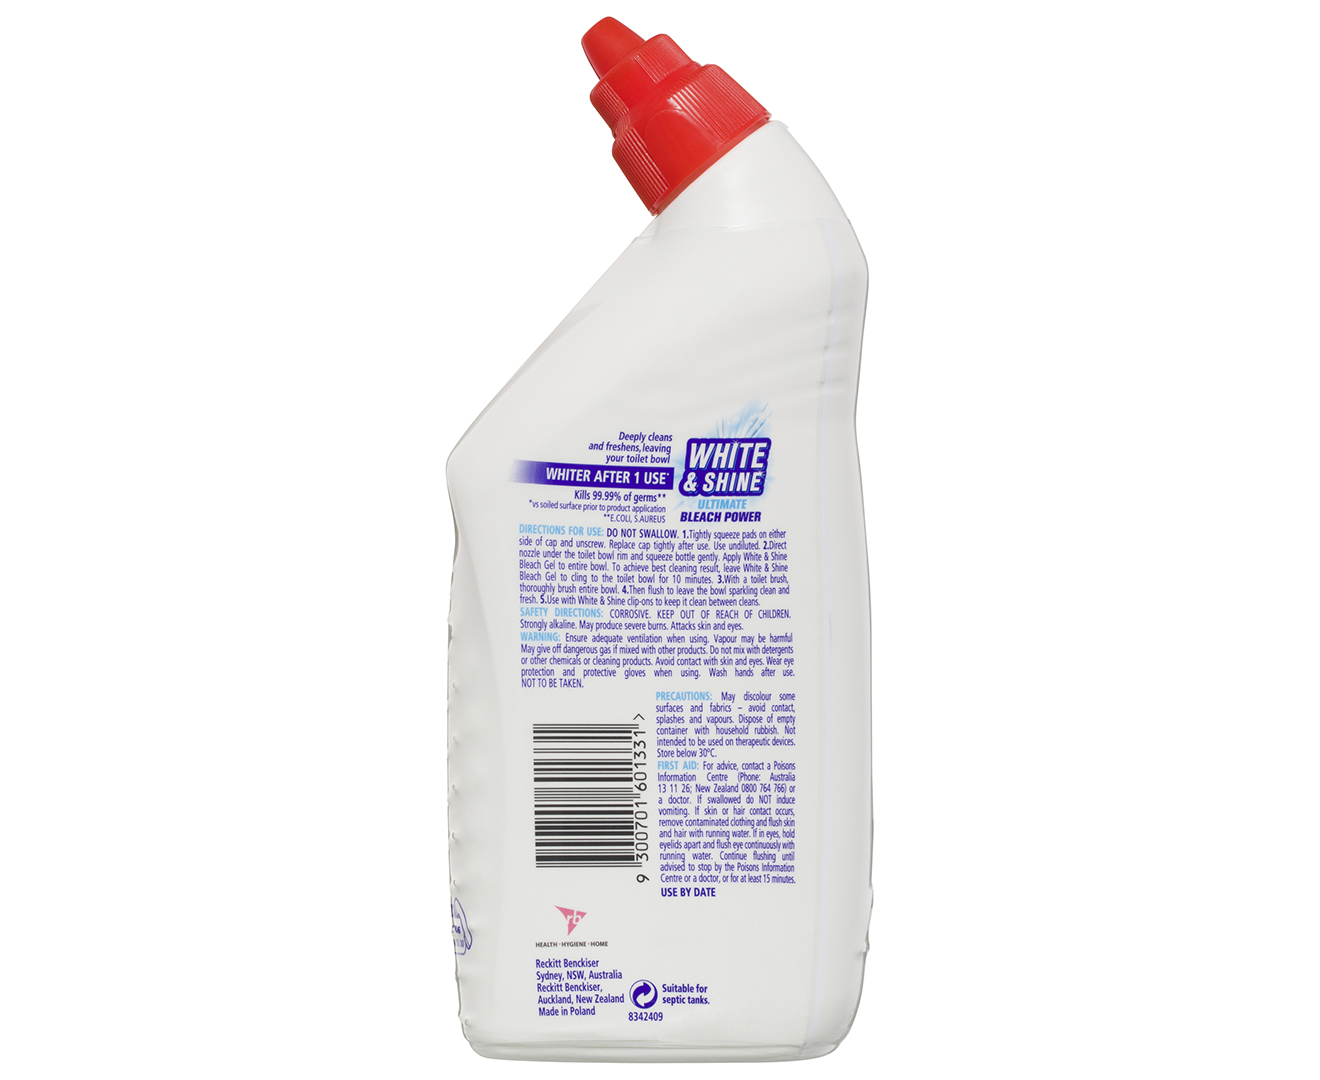 Harpic White & Shine 10X Toilet Cleaner - The Grocery Geek